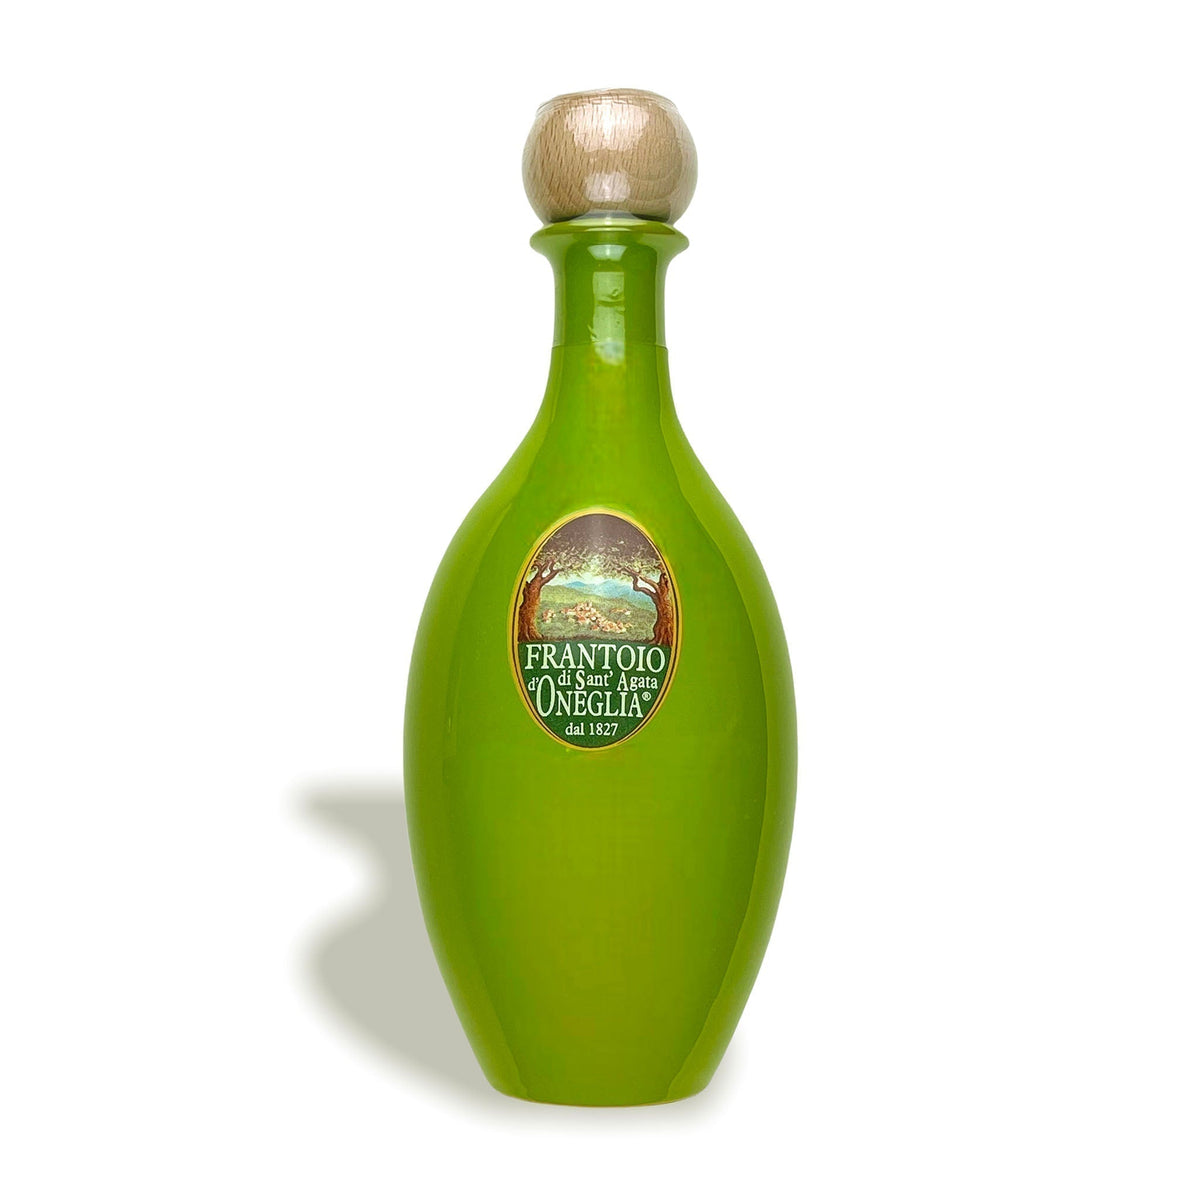 green ceramic bottle containing Buon Frutto Extra Virgin Olive Oil by Frantoio